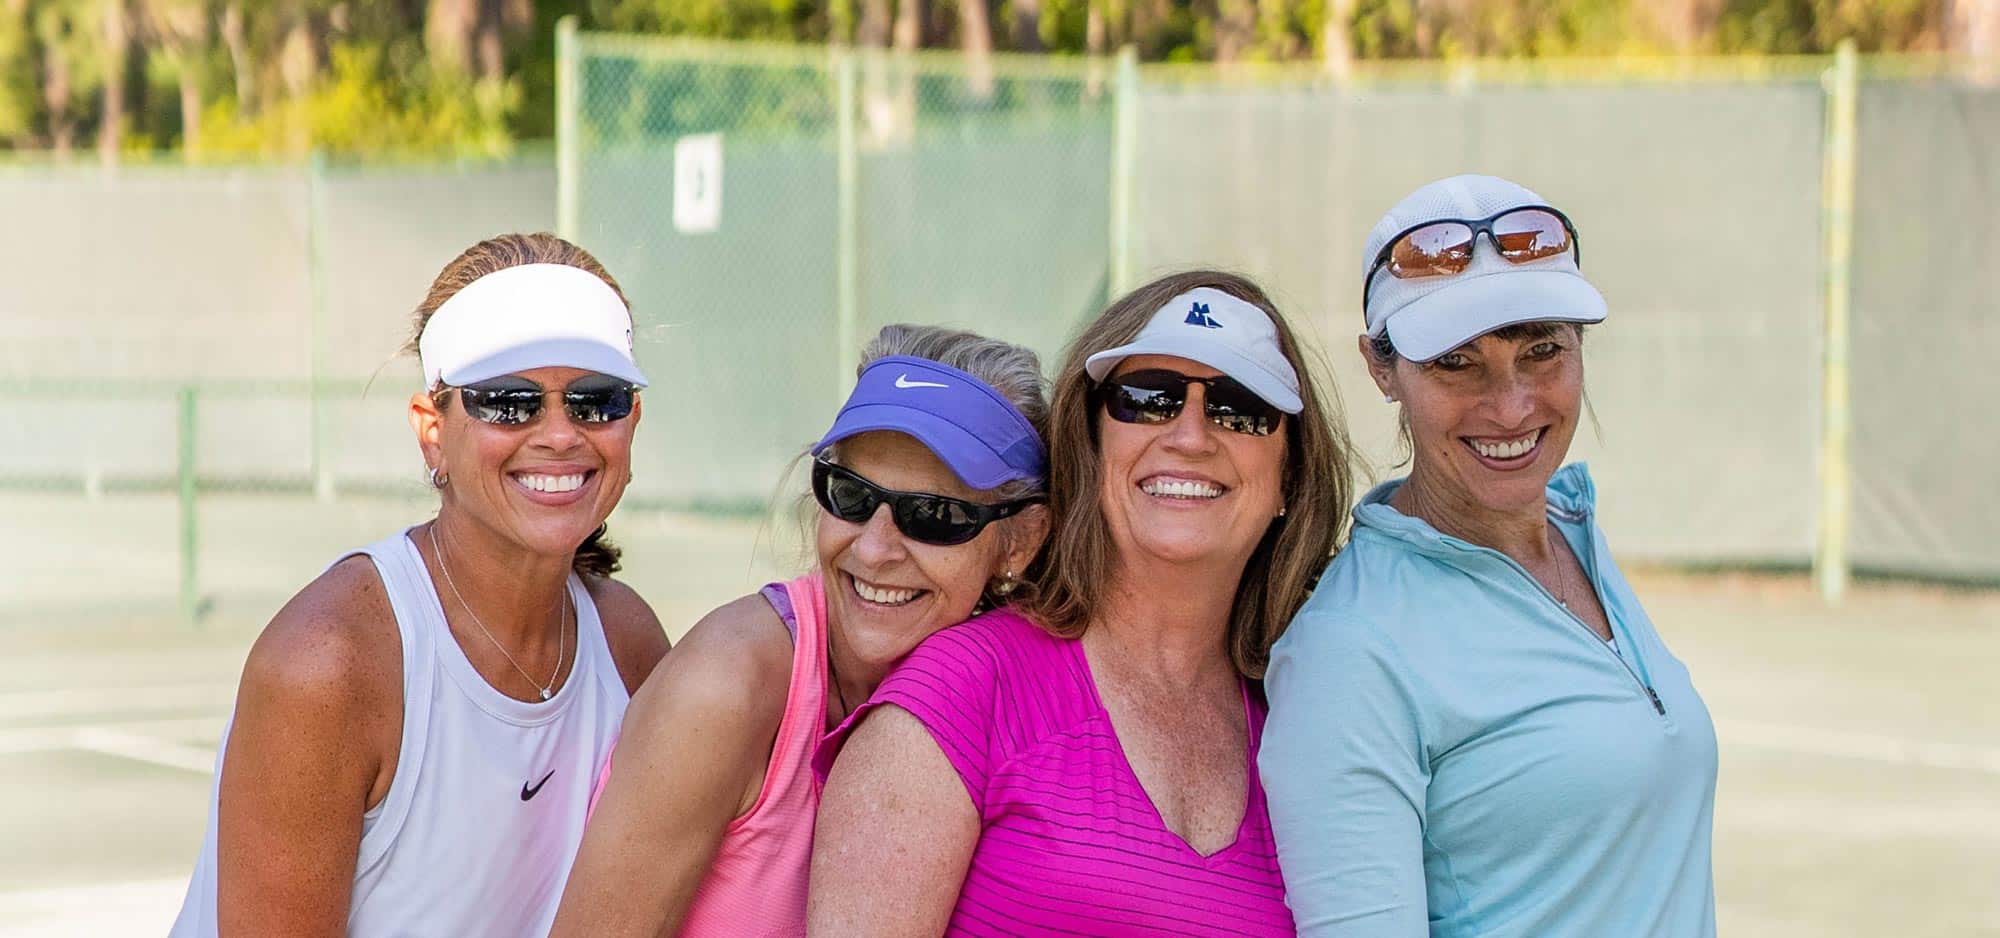 Four female neighbors and friends, wearing hats and visors, enjoy a sunny day playing court sports at The Landings.